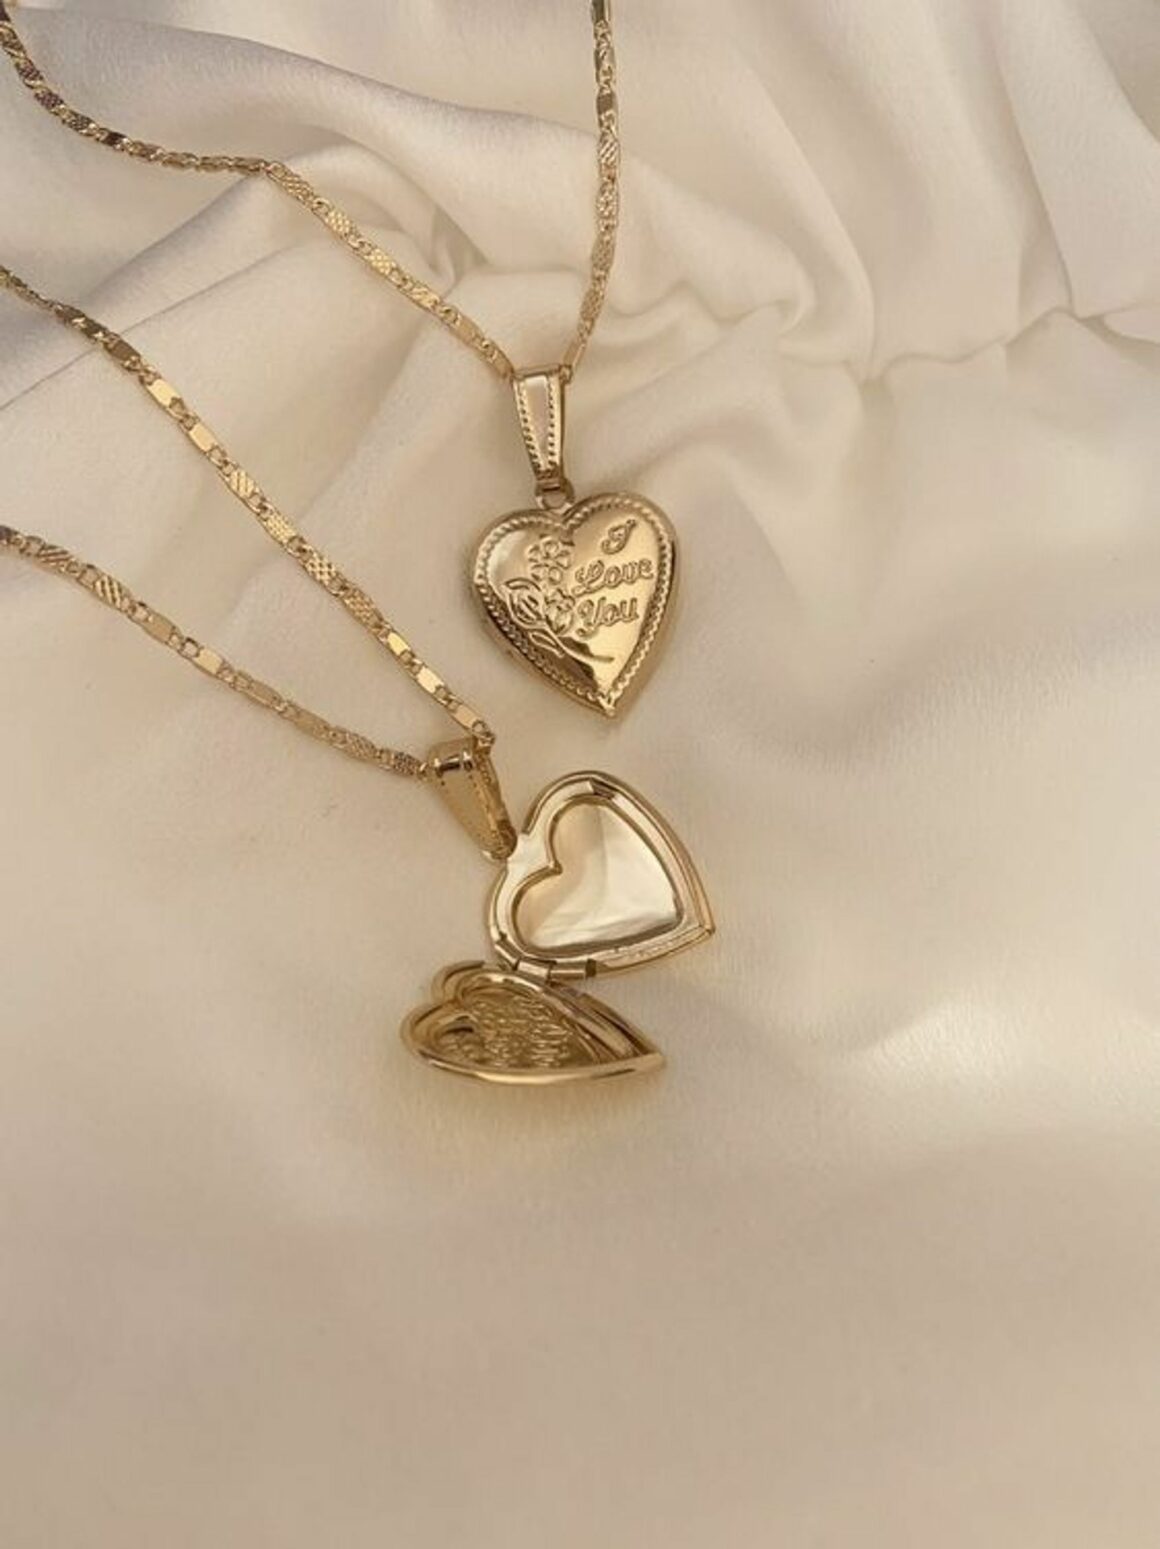 Pendant Vs Necklace Vs Locket: What is the Difference?